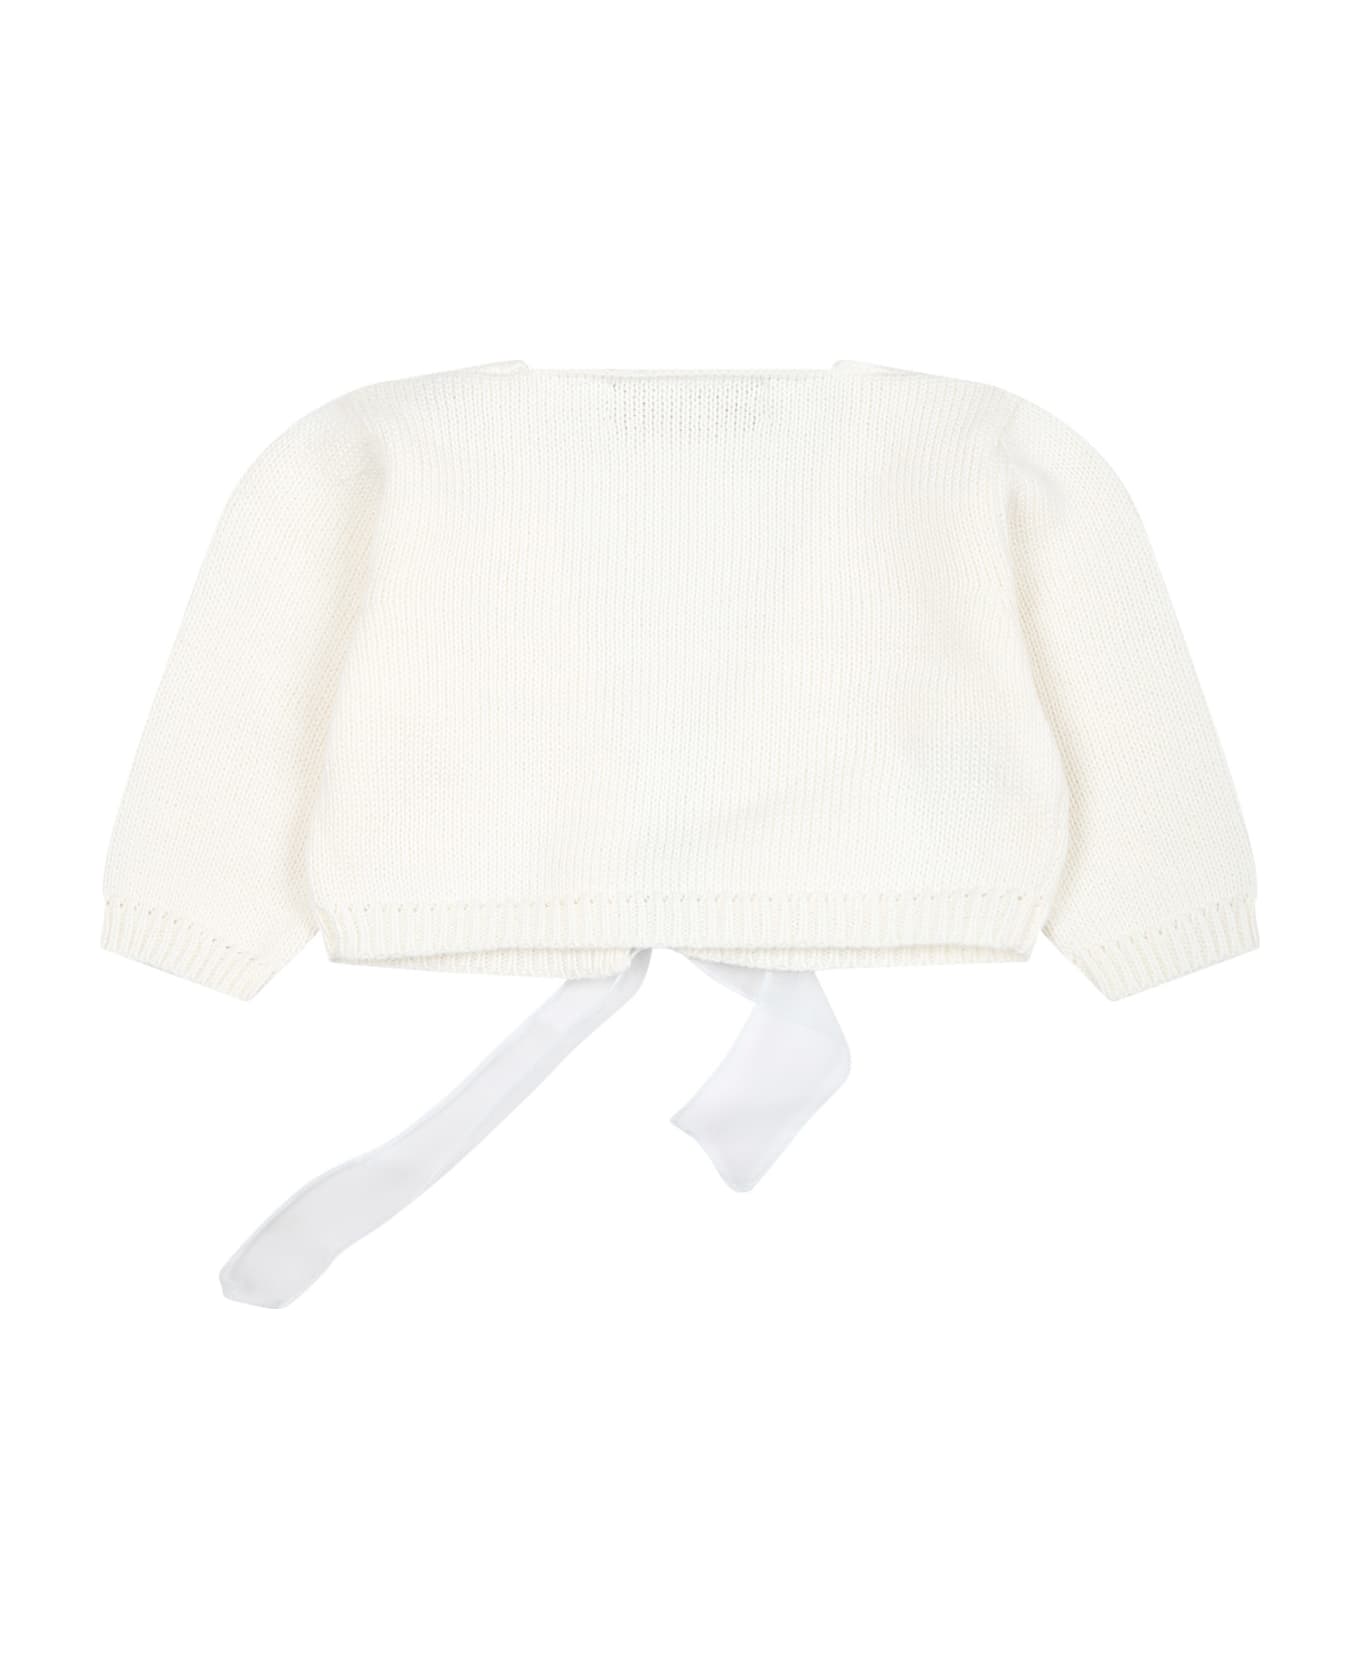 La stupenderia White Cardigan For Baby Girl With Light Blue Bow - White